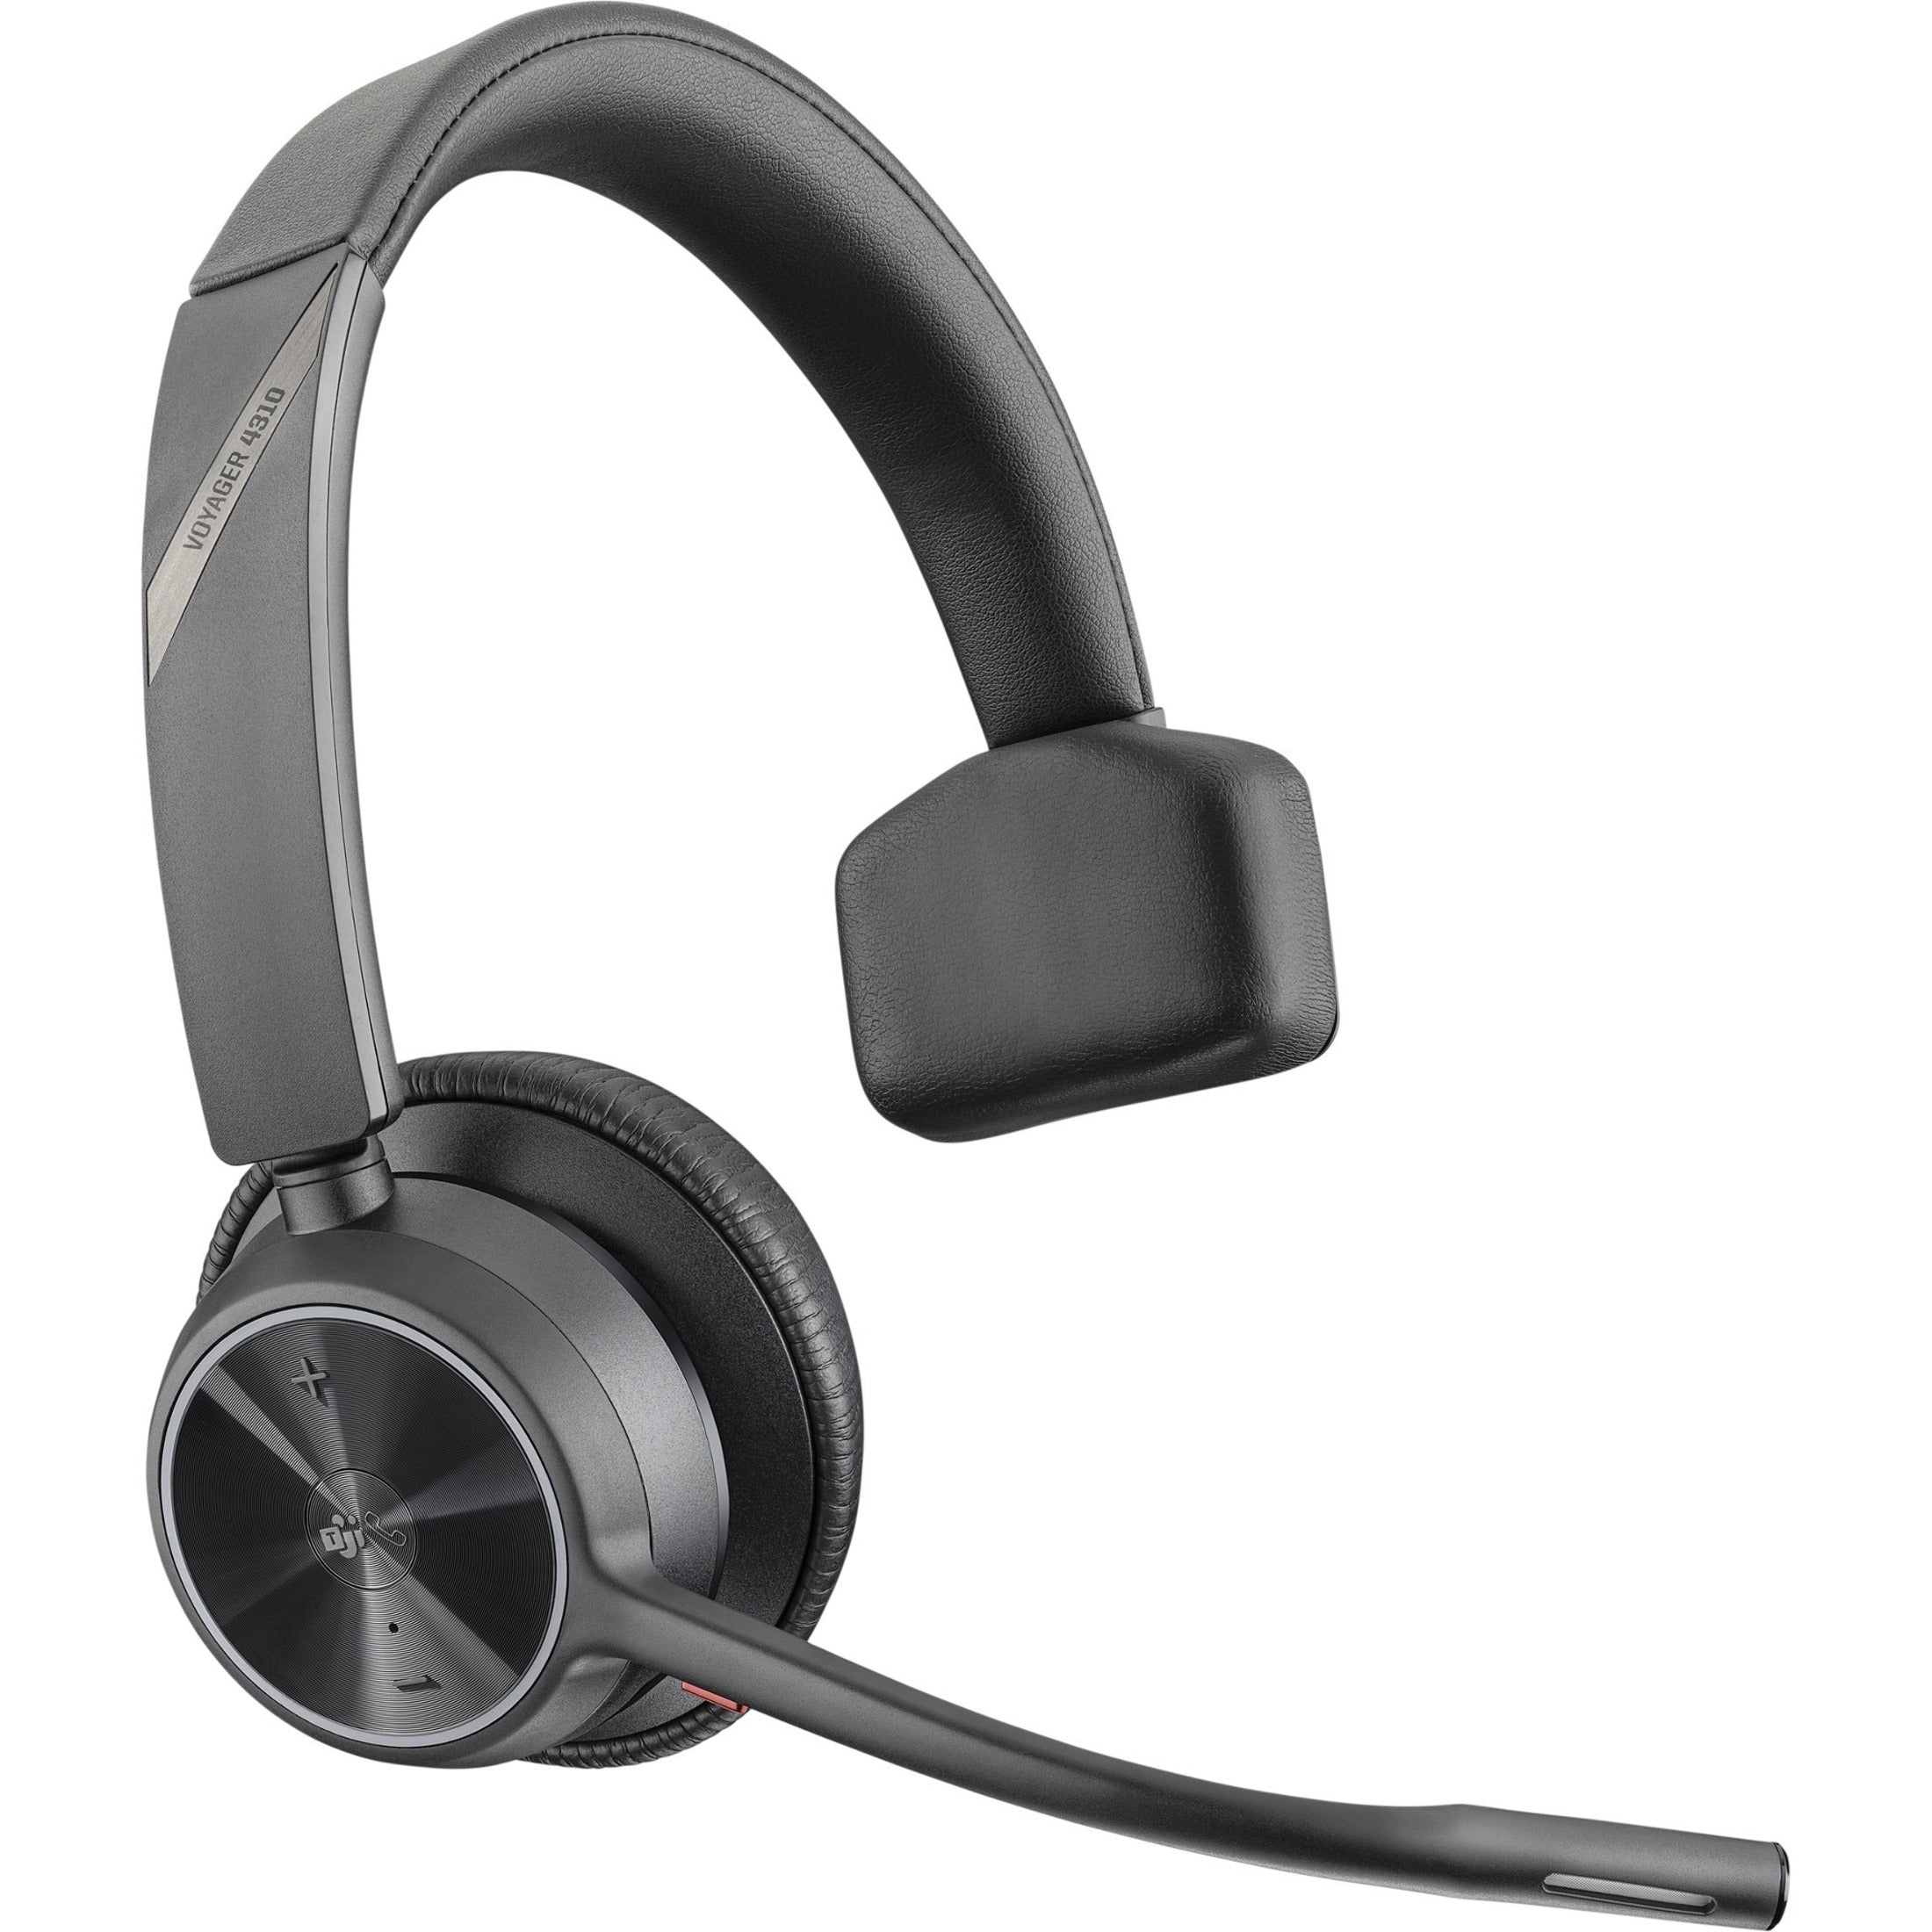 Poly 218470-02 Voyager 4300 UC 4310-M Headset, Mono, Wideband Audio, Noise Cancelling, USB Type A